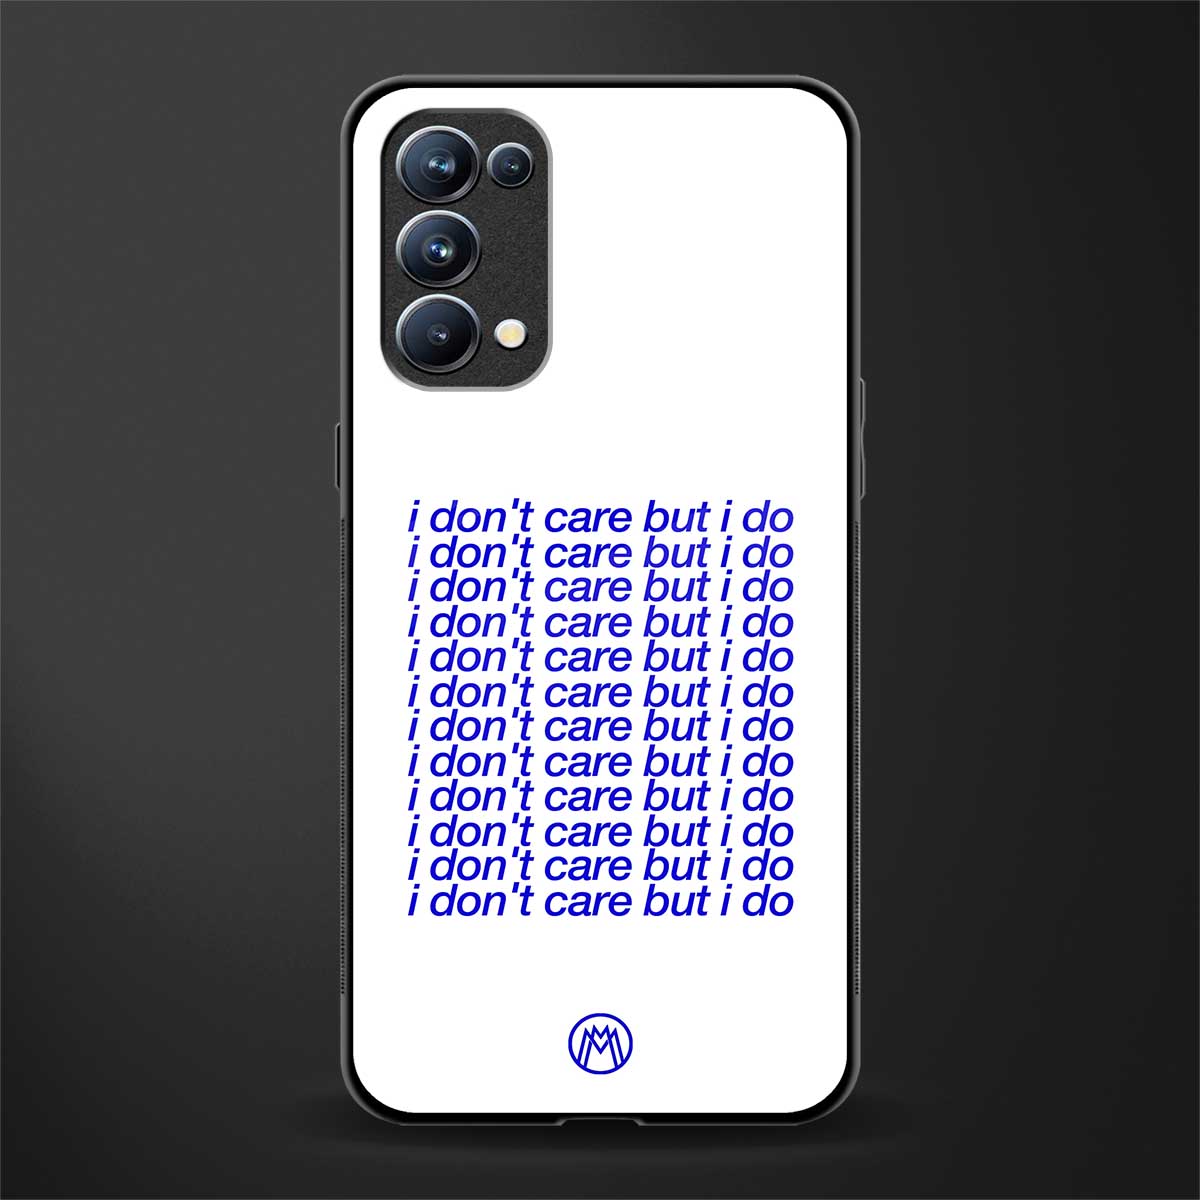 i don't care but i do glass case for oppo reno 5 pro image